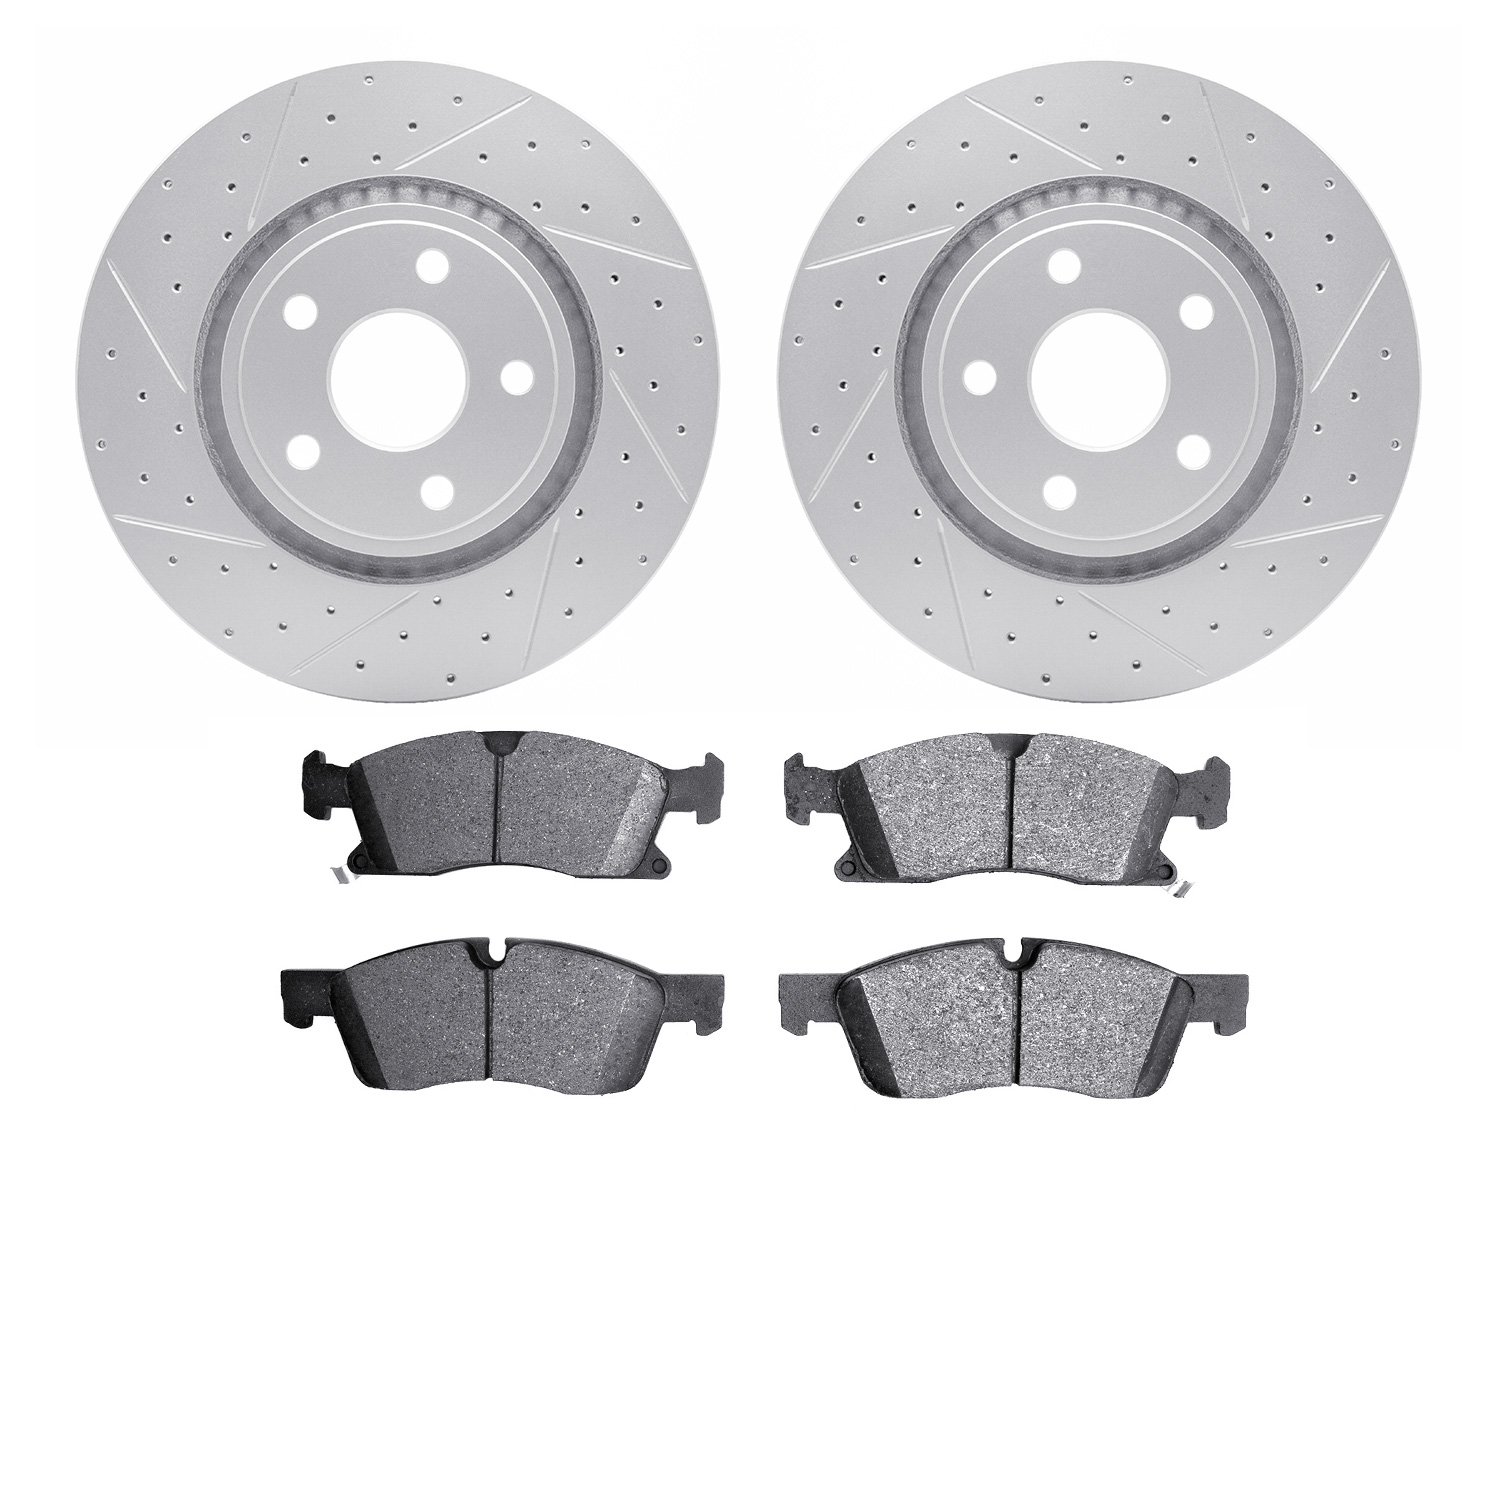 2502-42051 Geoperformance Drilled/Slotted Rotors w/5000 Advanced Brake Pads Kit, Fits Select Mopar, Position: Front